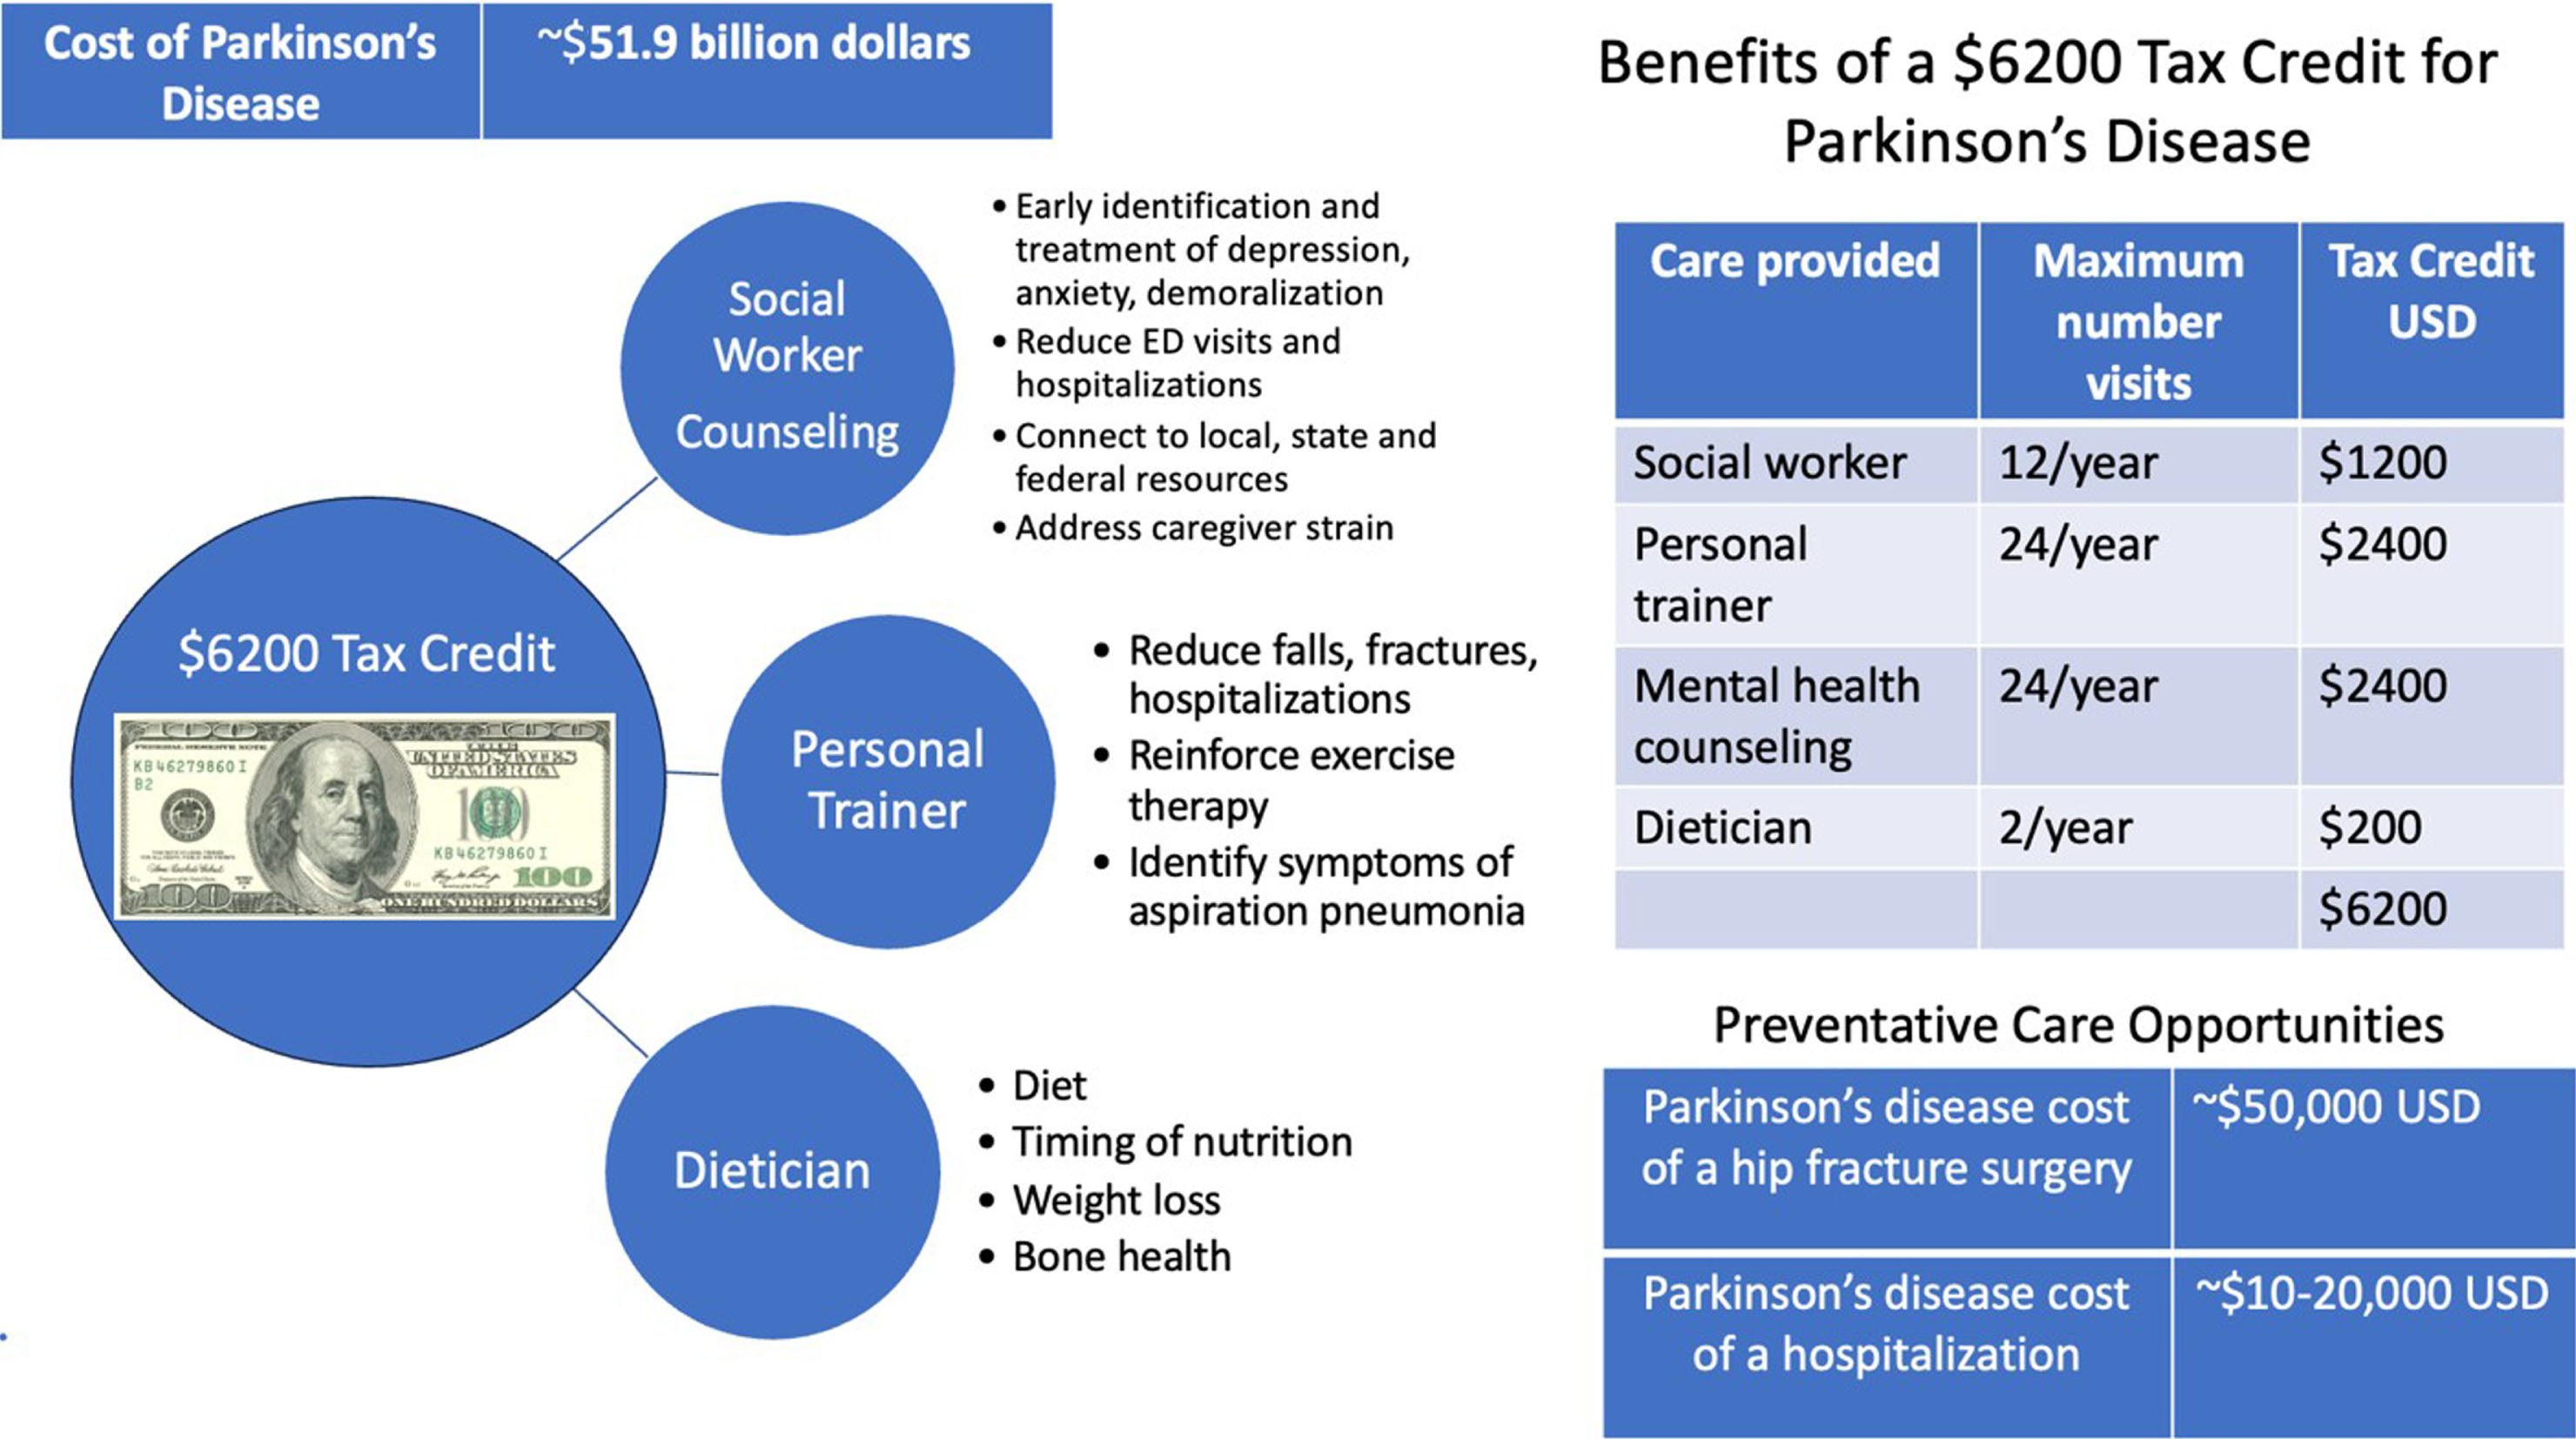 Cost of Parkinson’s disease and benefits of a tax credit.